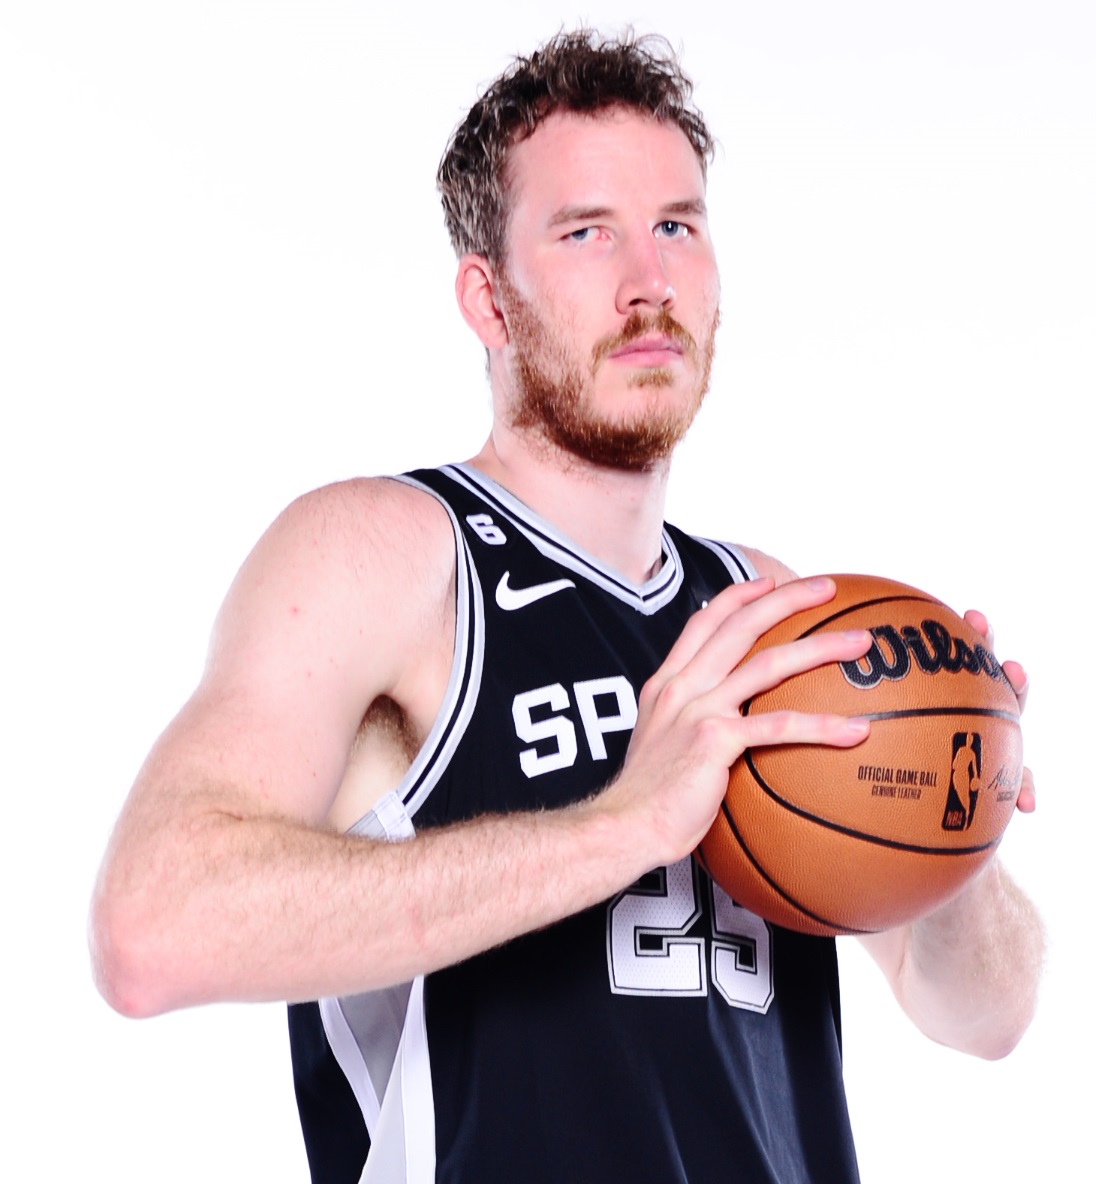 RT @NBA: Join us in wishing @JakobPoeltl of the @spurs a HAPPY 27th BIRTHDAY! #NBABDAY https://t.co/0J3gvXq0bS